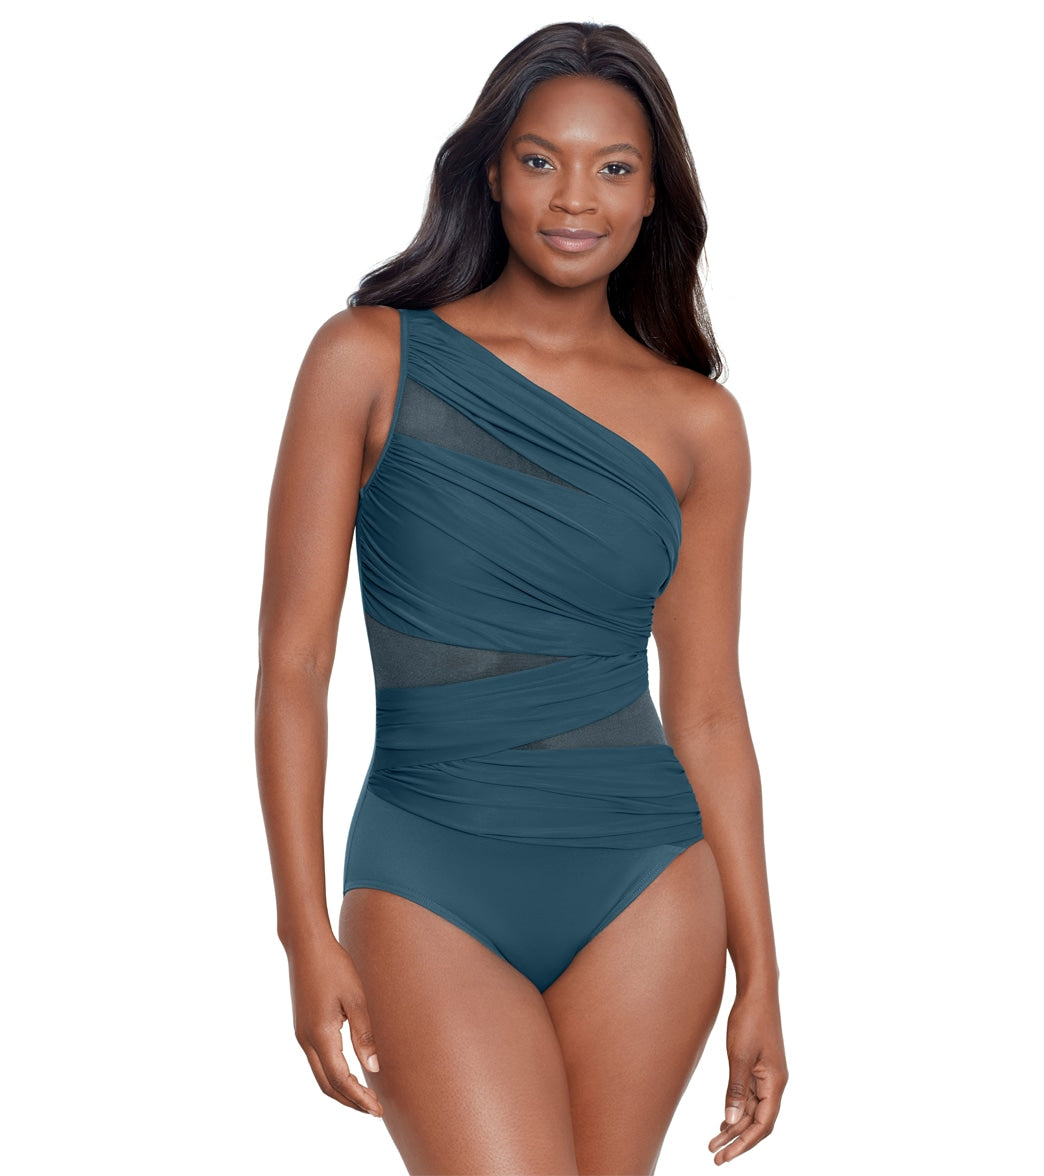 Miraclesuit Women's Tamara Tigre It's A Wrap One Piece Swimsuit at